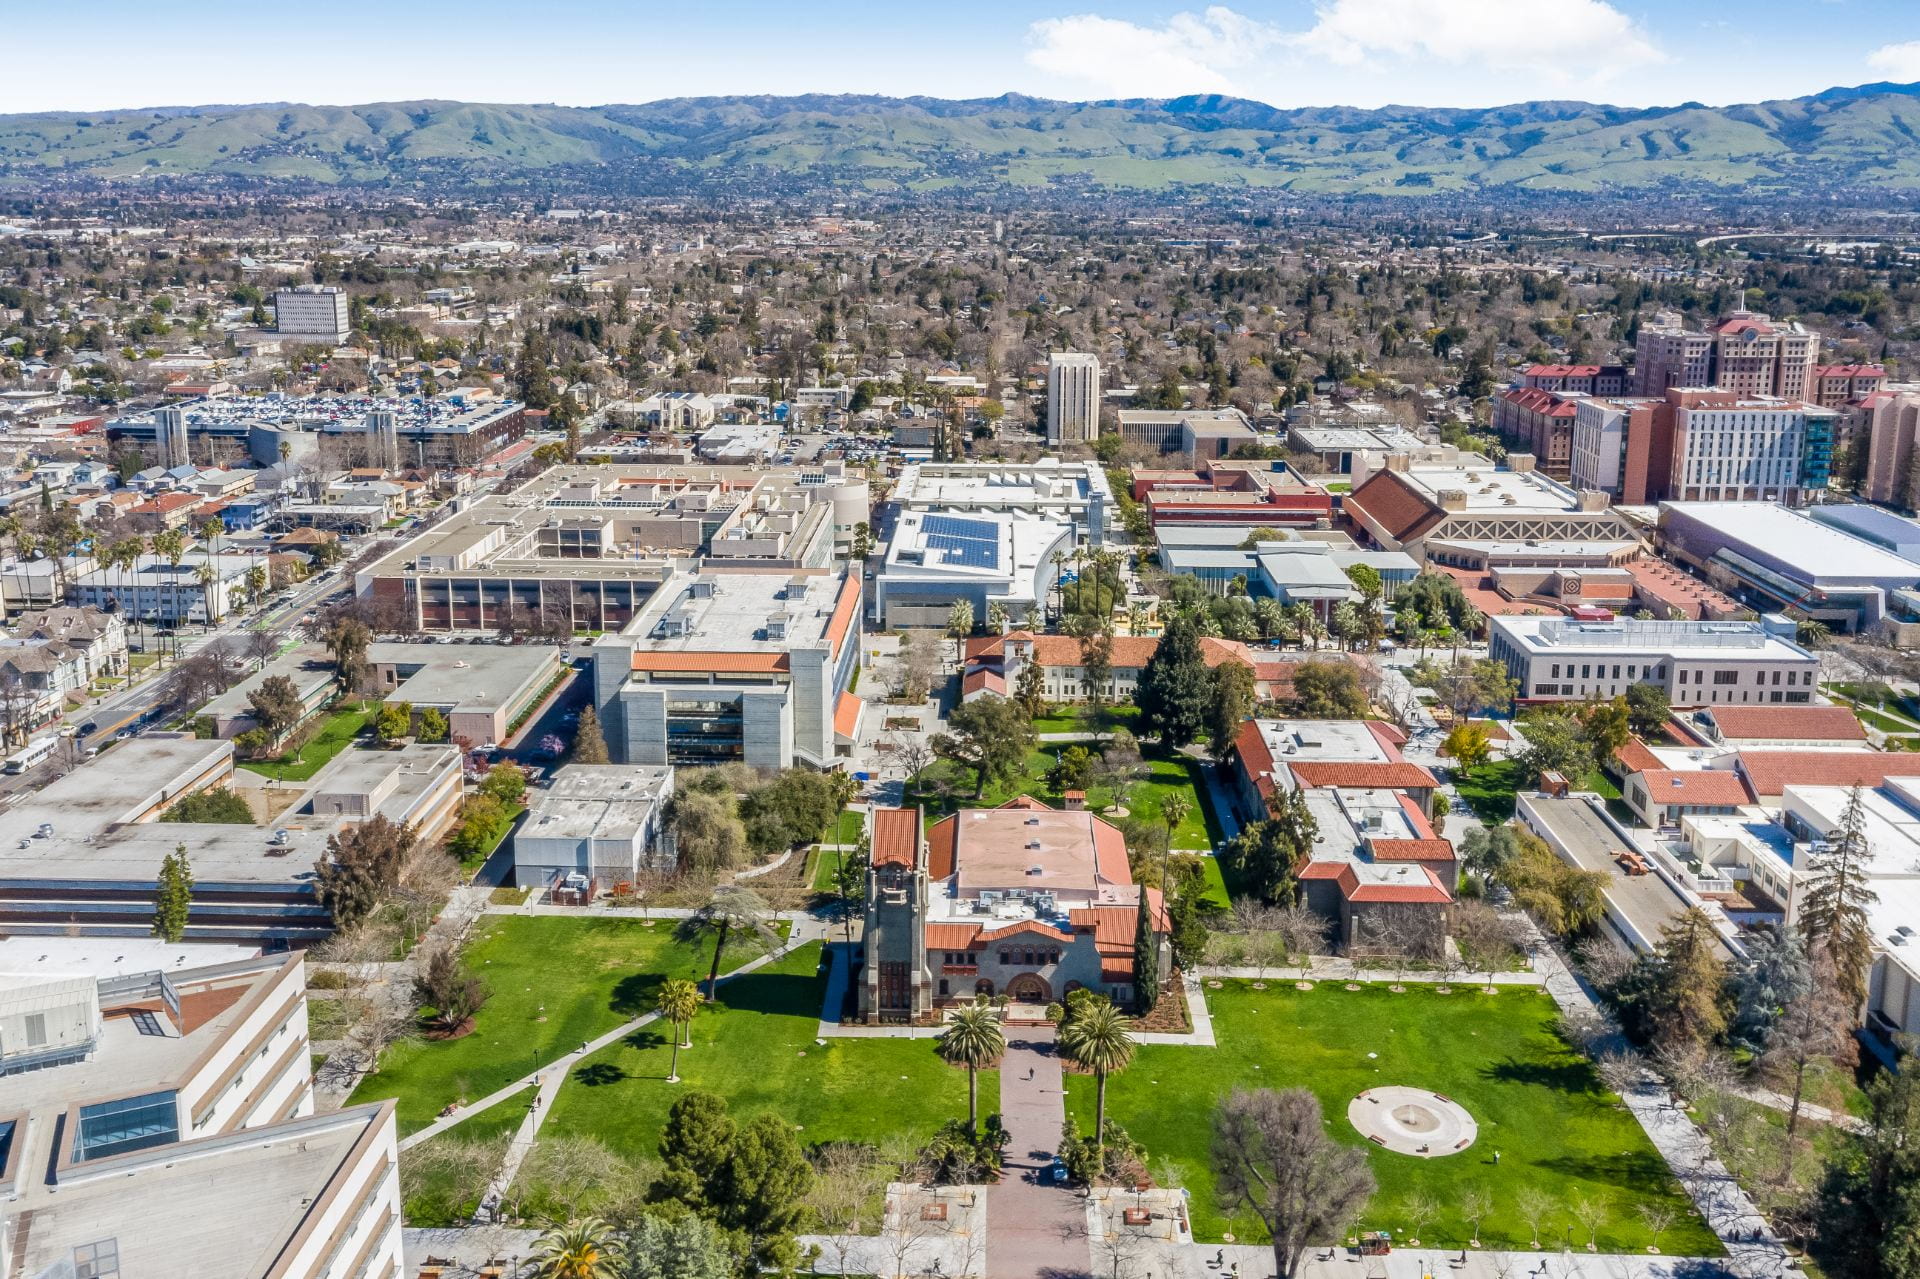 New Campus Master Plan Aims to Revitalize San José State Campus and